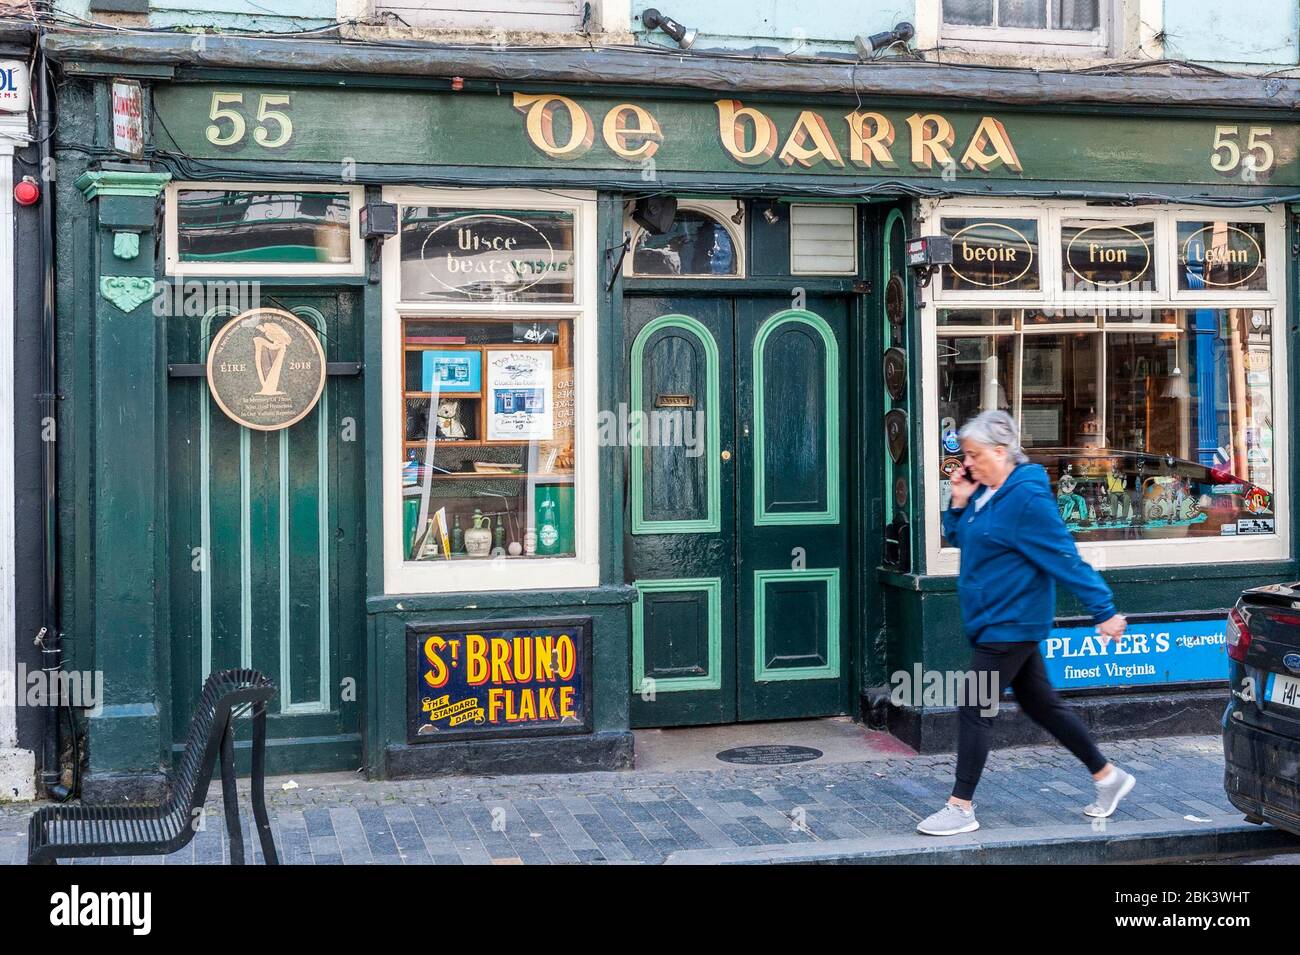 Clonakilty, West Cork, Ireland. 1st May, 2020. A woman walks past the famous Clonakilty music pub, De Barra's.   The Irish Government has said pubs could be the last businesses to re-open after the Covid-19 pandemic due to social distancing concerns. Credit: AG News/Alamy Live News Stock Photo